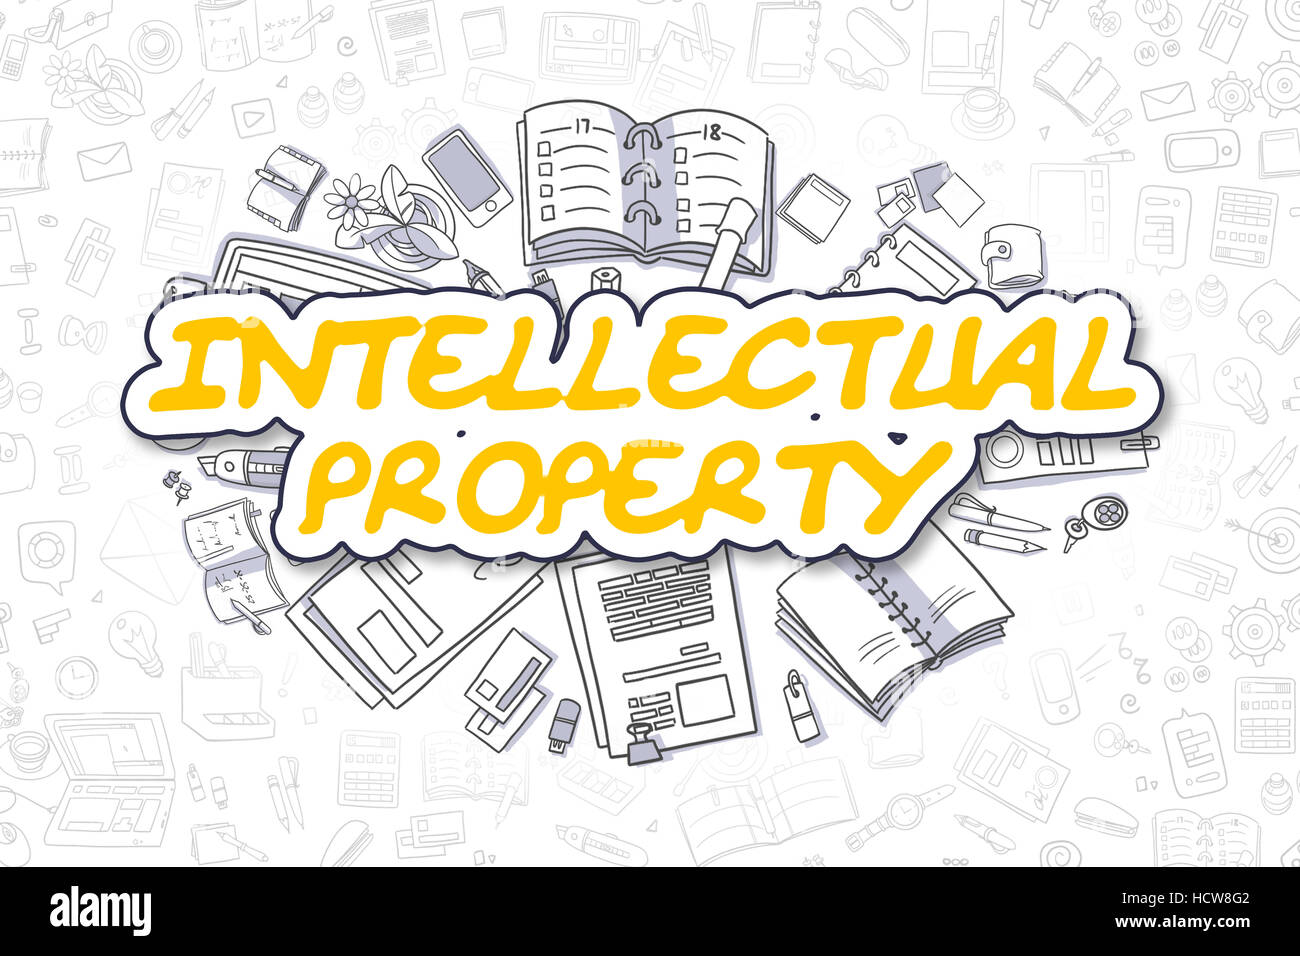 Intellectual Property - Hand Drawn Business Illustration with Business Doodles. Yellow Word - Intellectual Property - Cartoon Business Concept. Stock Photo